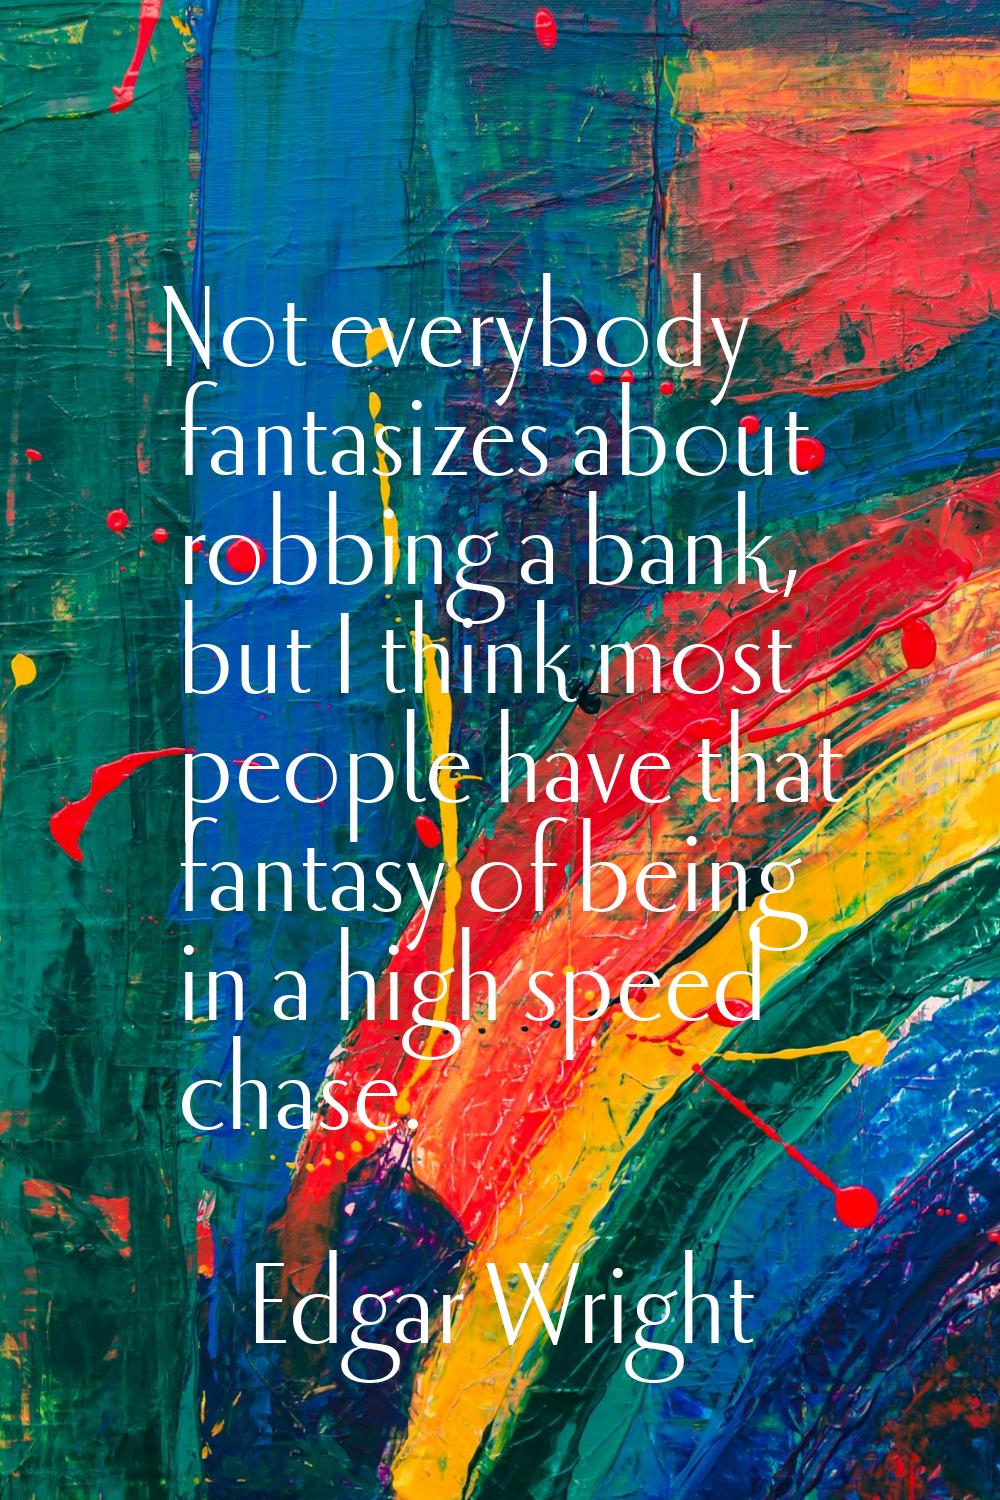 Not everybody fantasizes about robbing a bank, but I think most people have that fantasy of being i